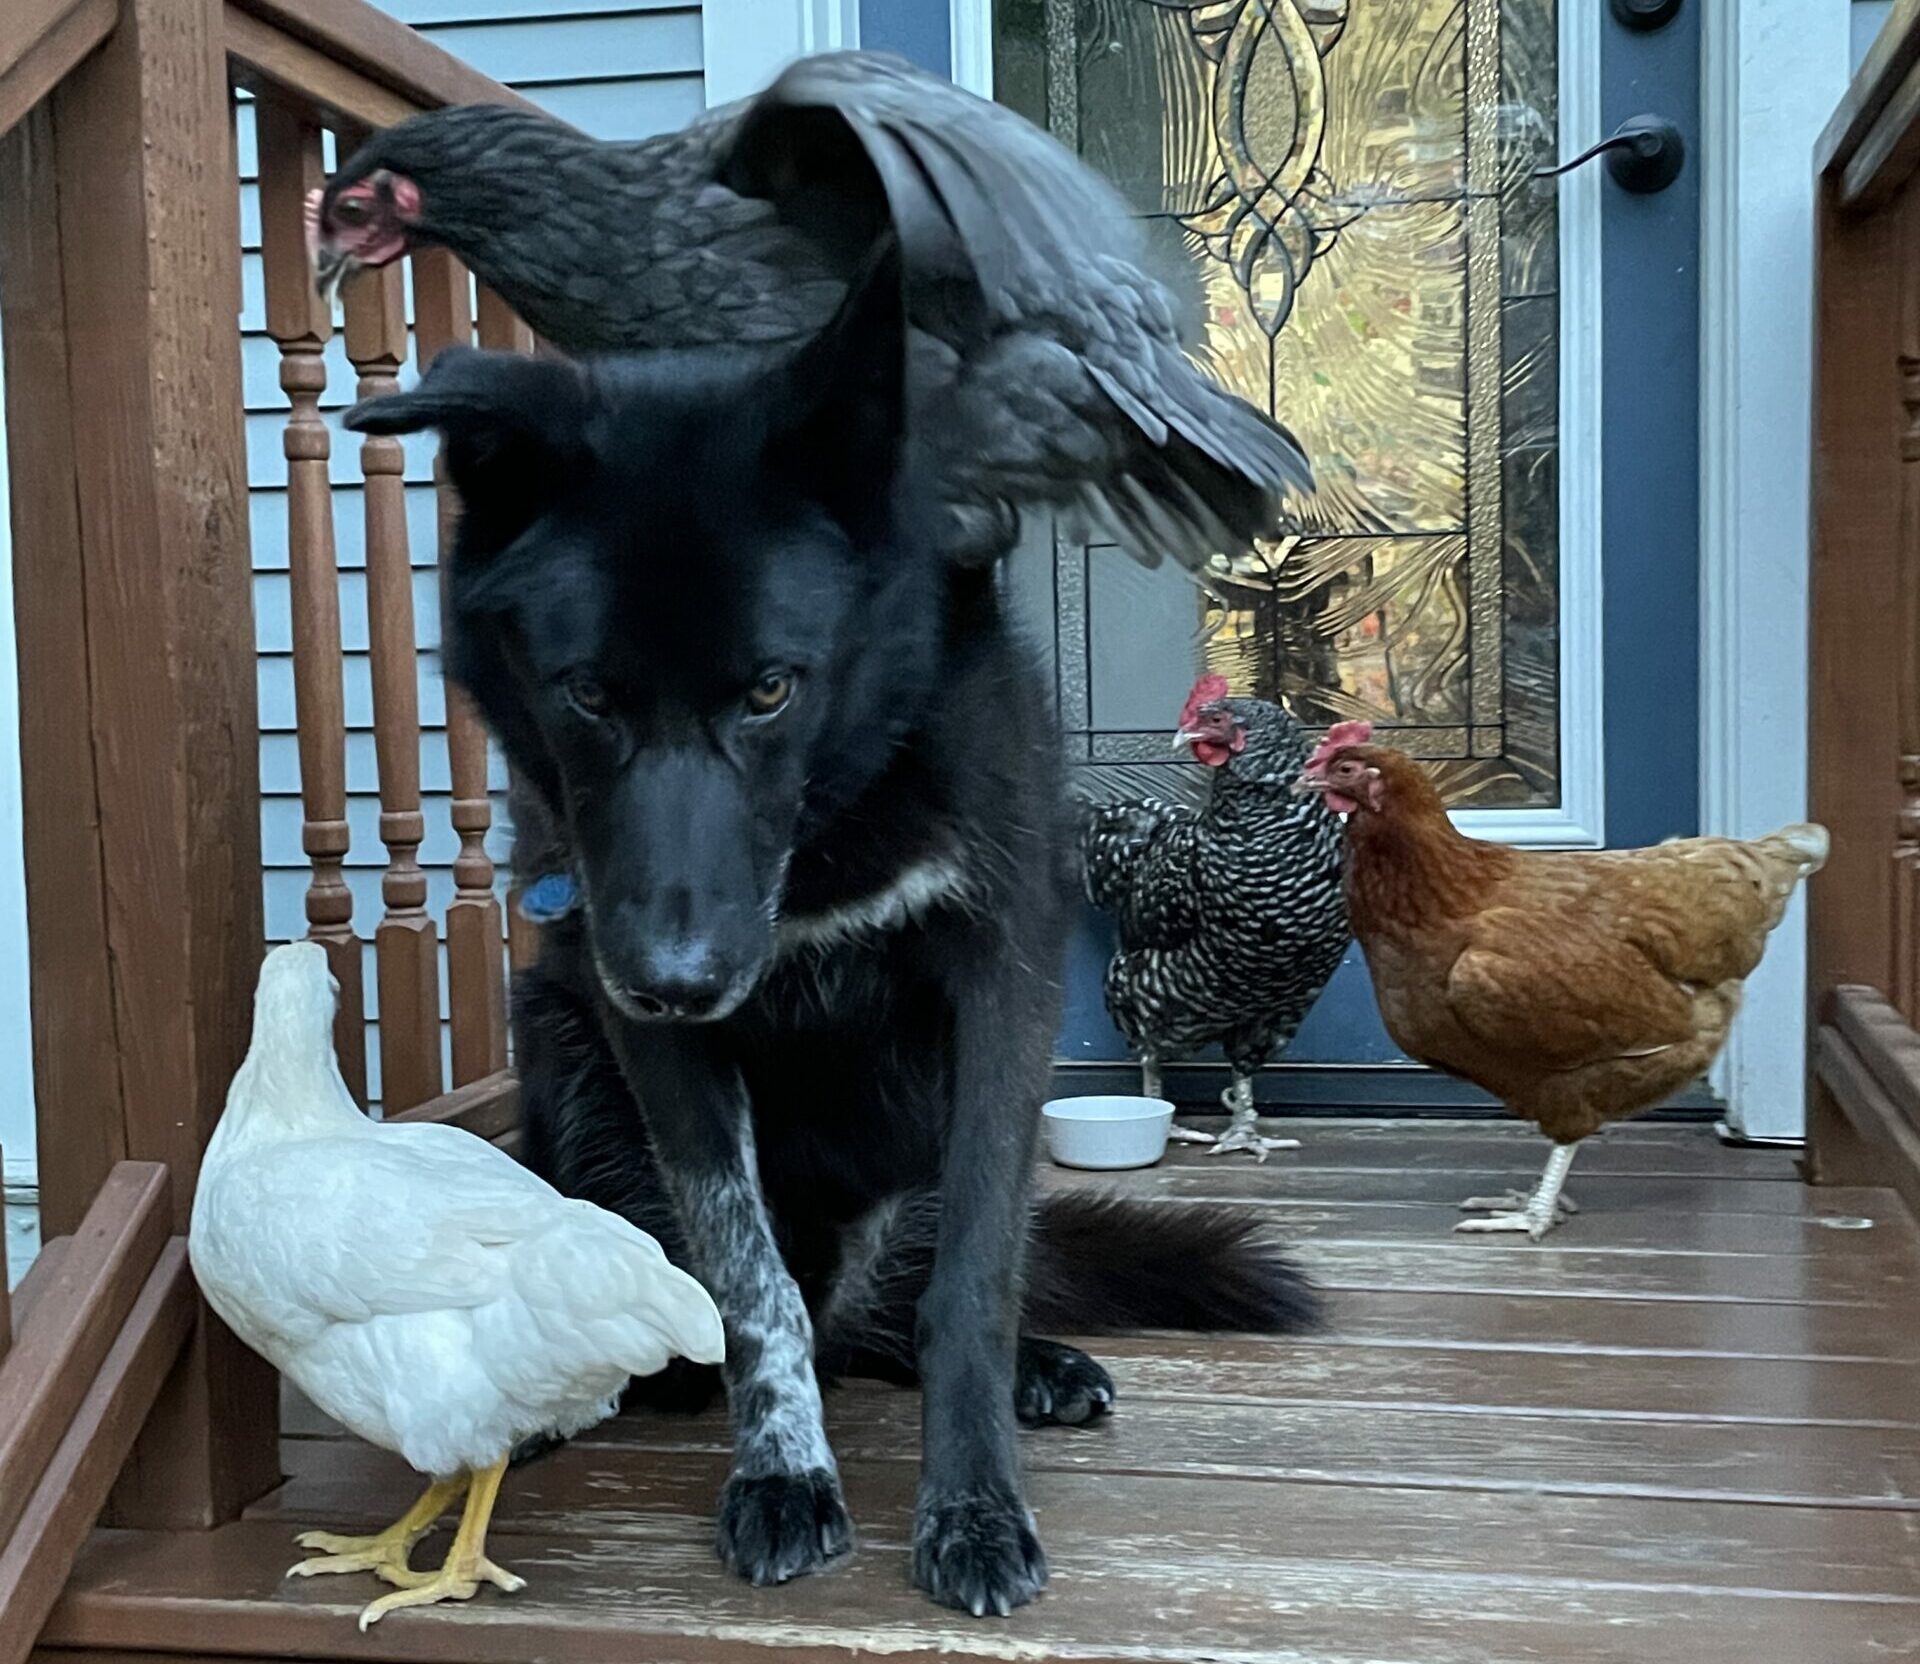 Turner The Sled Dog, Serving As A Roost For The Chickens